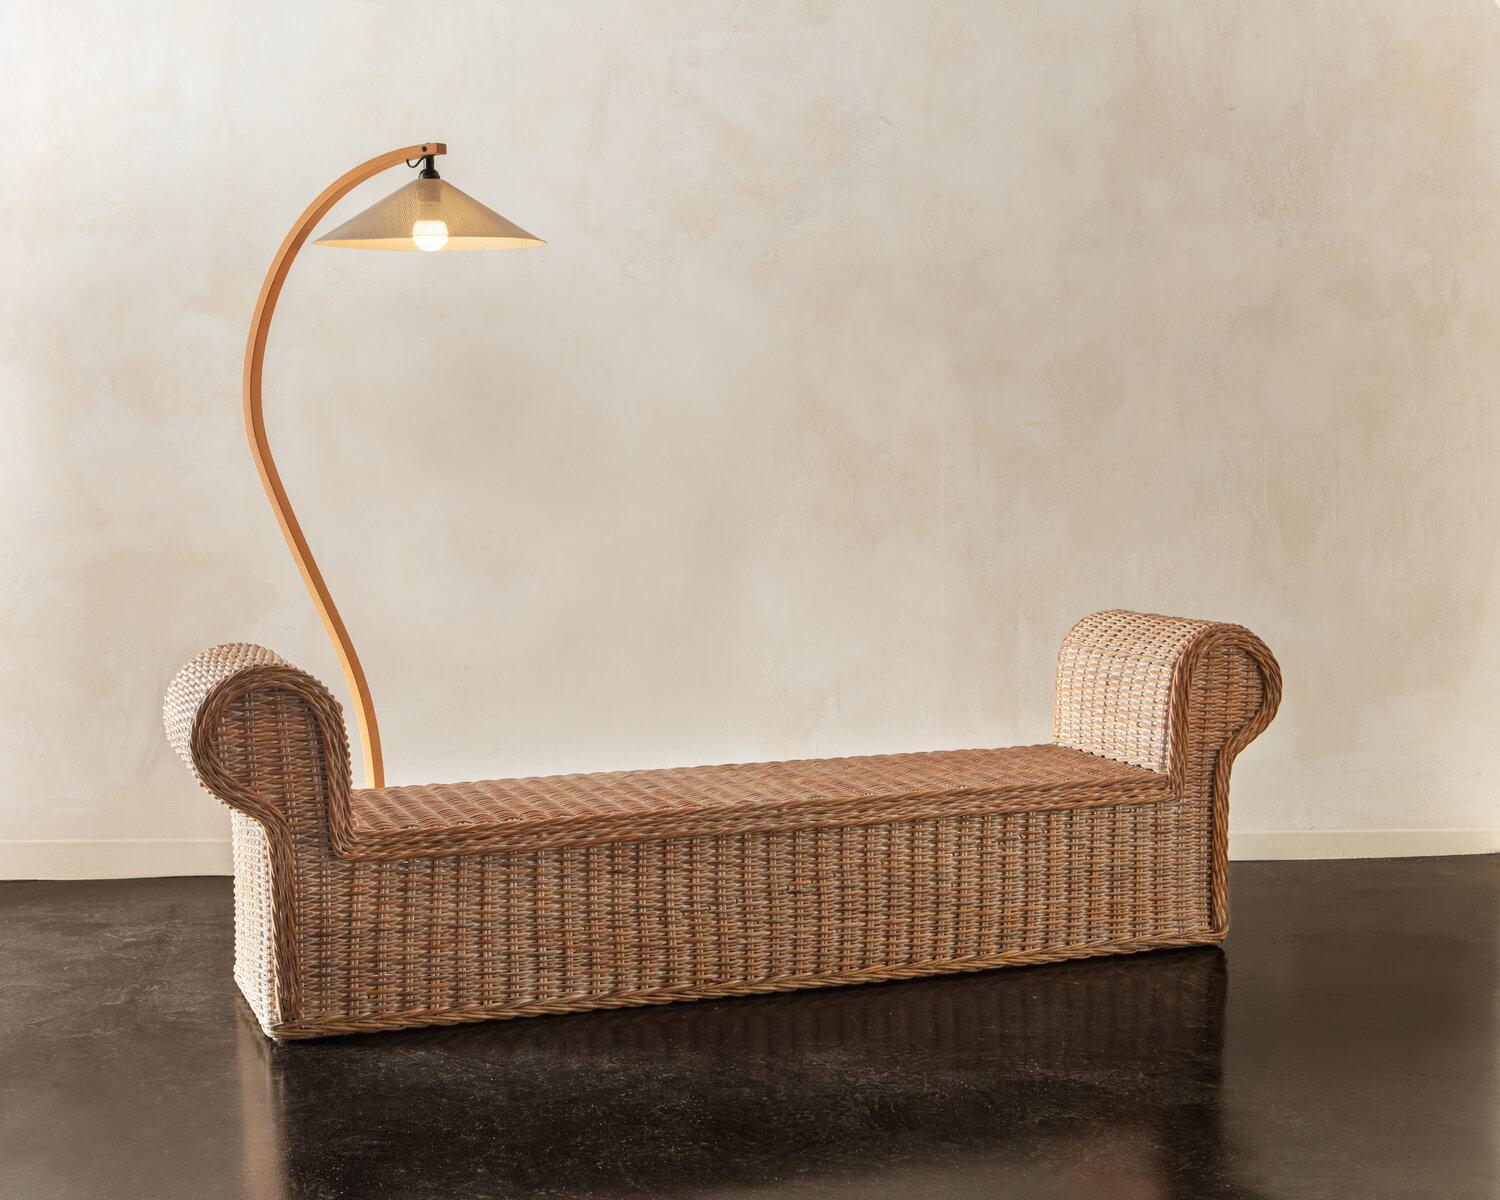 A Danish bentwood floor lamp designed in the 1970s for Caprani of Denmark. Featuring a unique perforated metal shade; a C-shaped metal base, a gorgeous bentwood wooden frame and a floor switch.